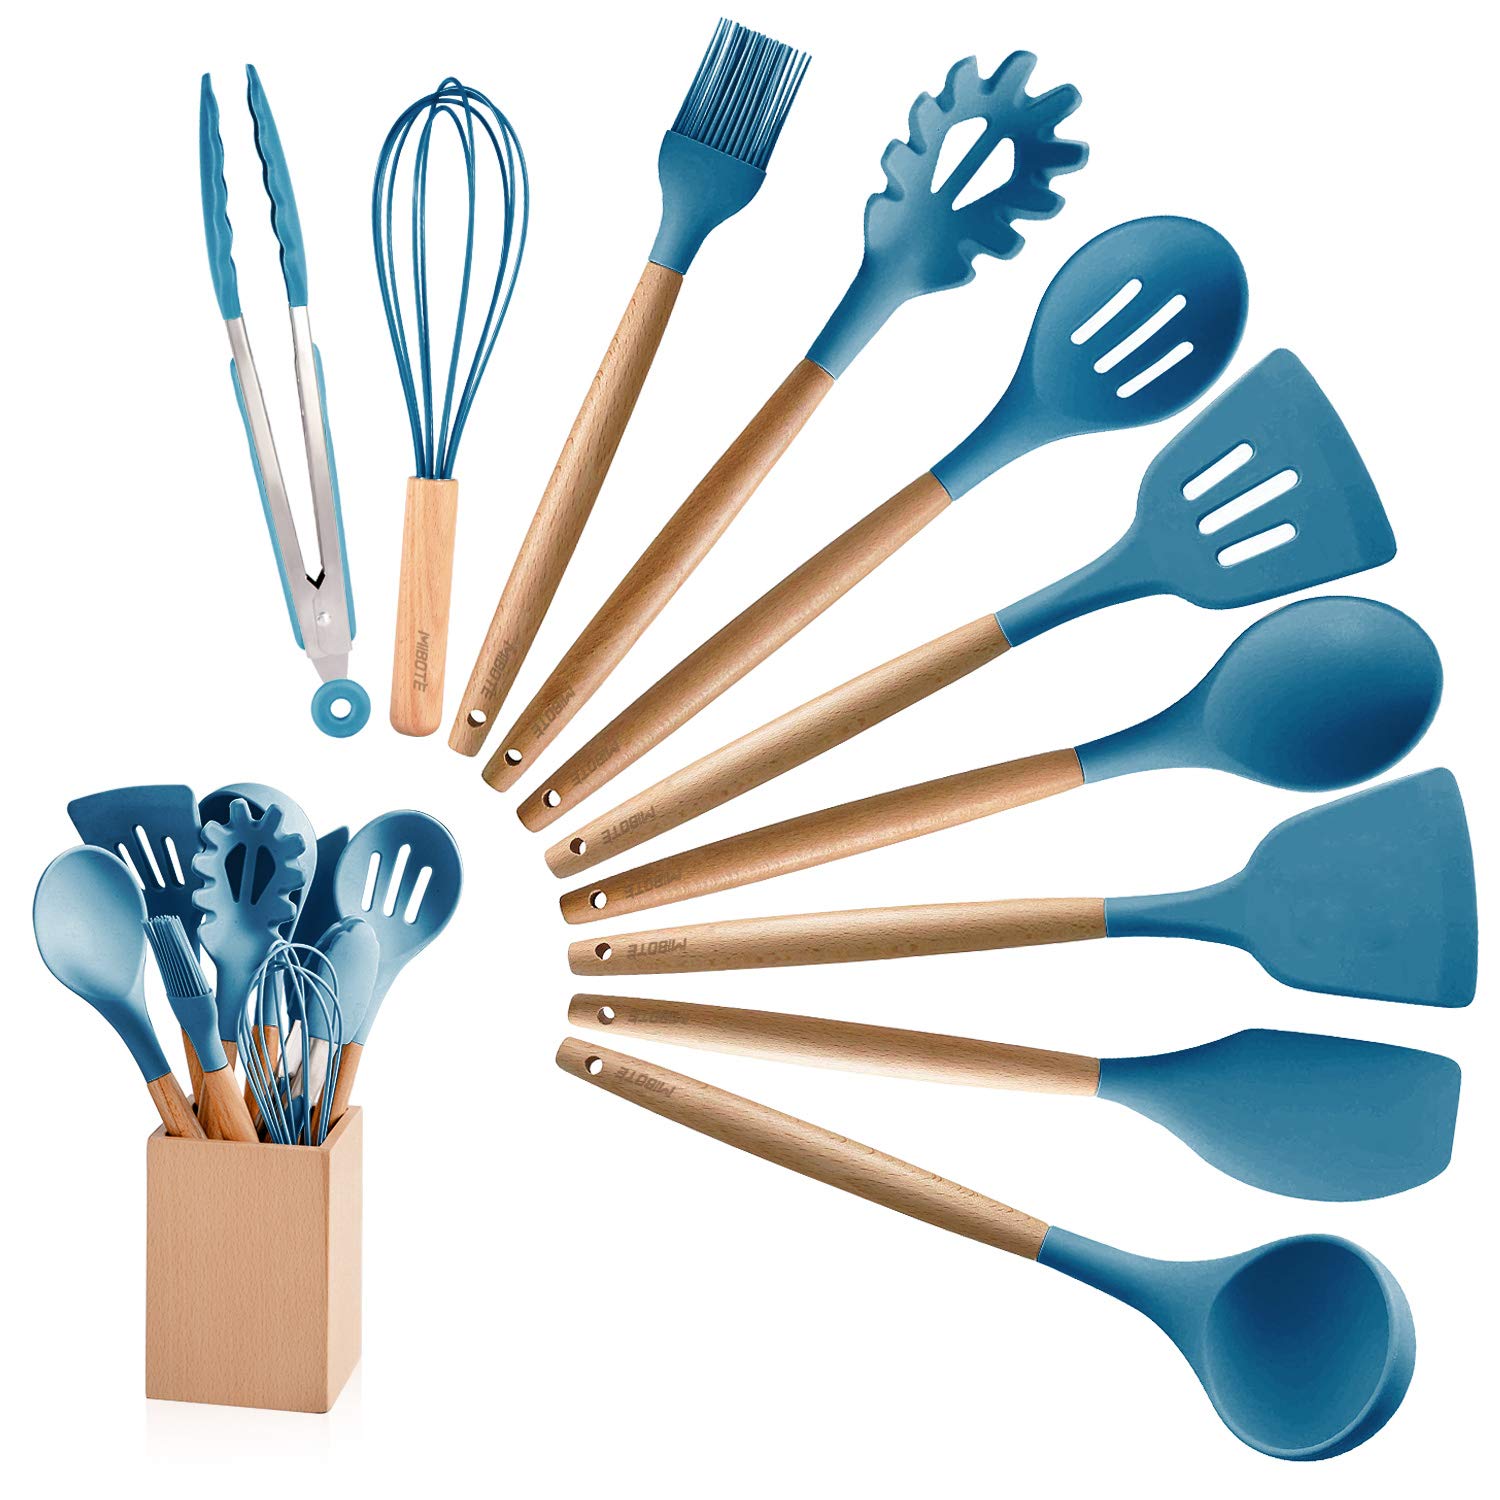 MIBOTE 10 Pieces Silicone Cooking Utensils Kitchen Utensil Set with Holder, Acacia Wooden Cooking Tool Turner Tongs Spatula Spoon for Nonstick Cookware - Best Kitchen Tools Gadgets (Blue)